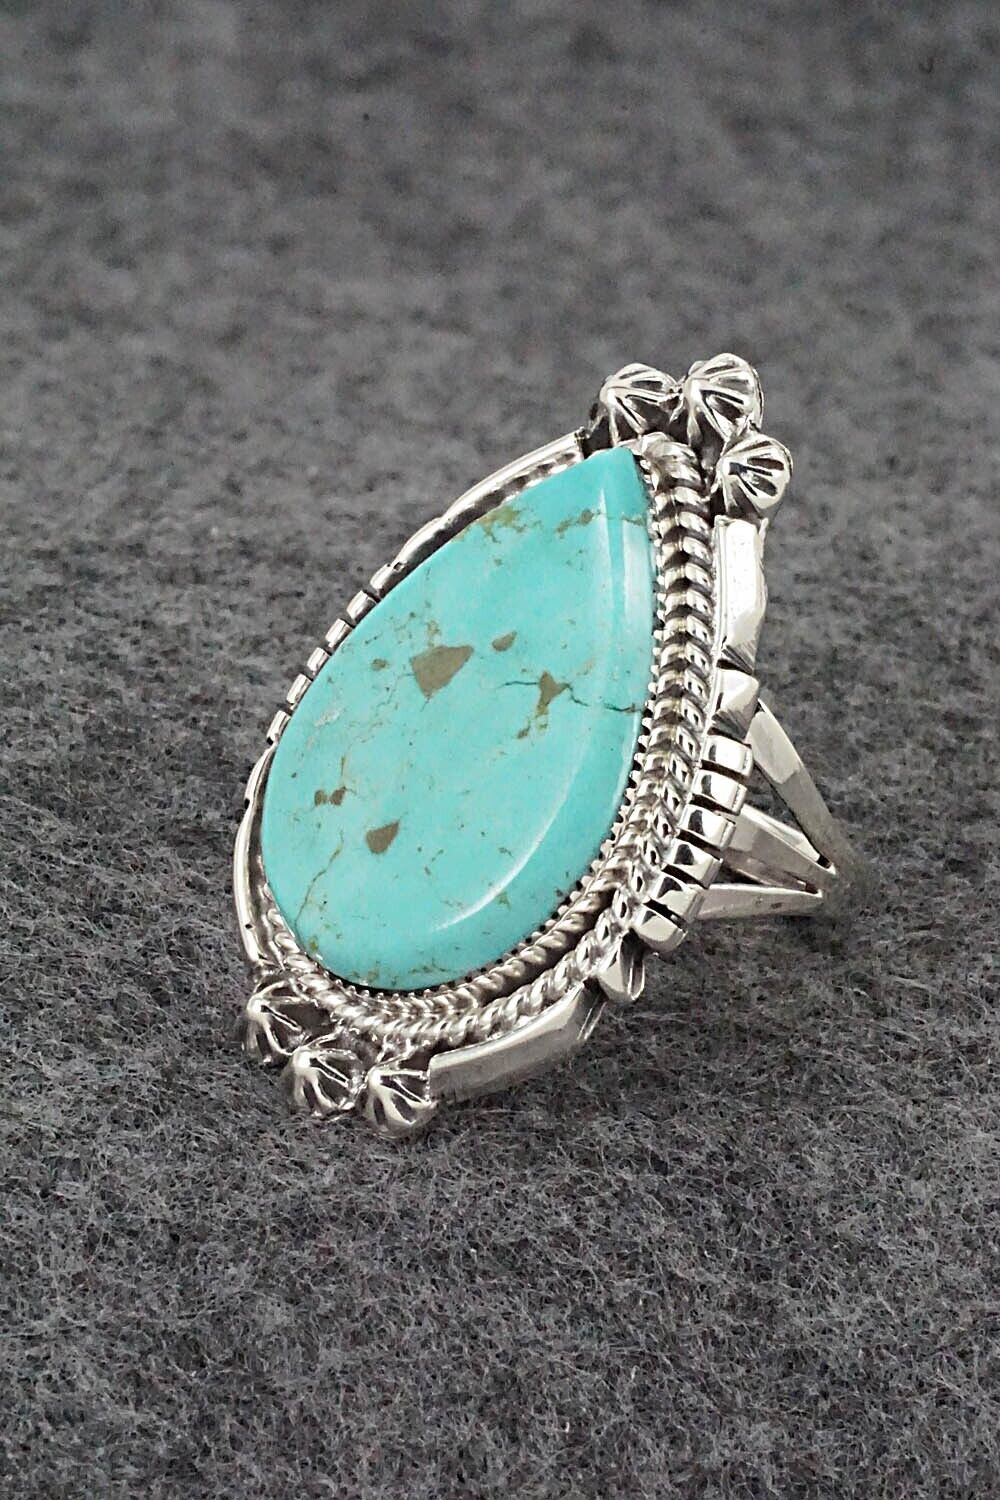 Turquoise & Sterling Silver Ring - Andrew Vandever - Size 7.25